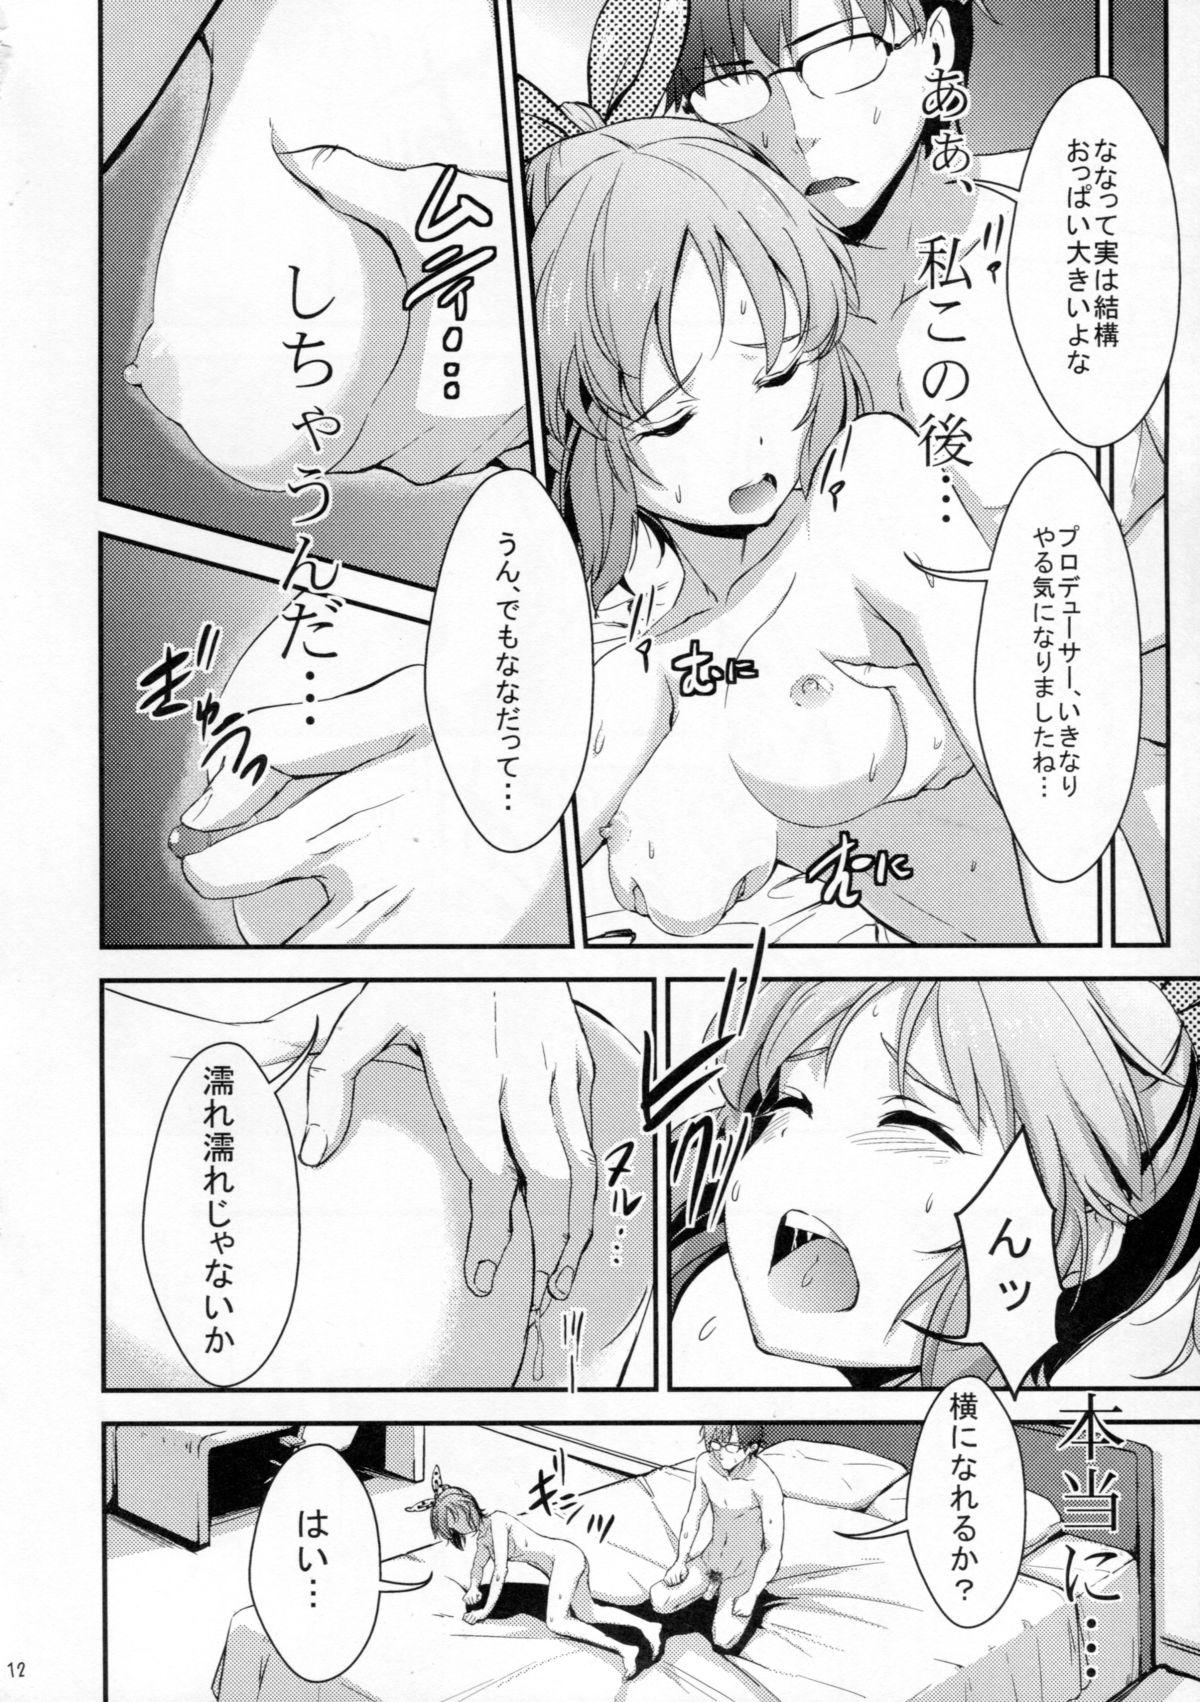 Romantic Siccative 86 - The idolmaster Grande - Page 10